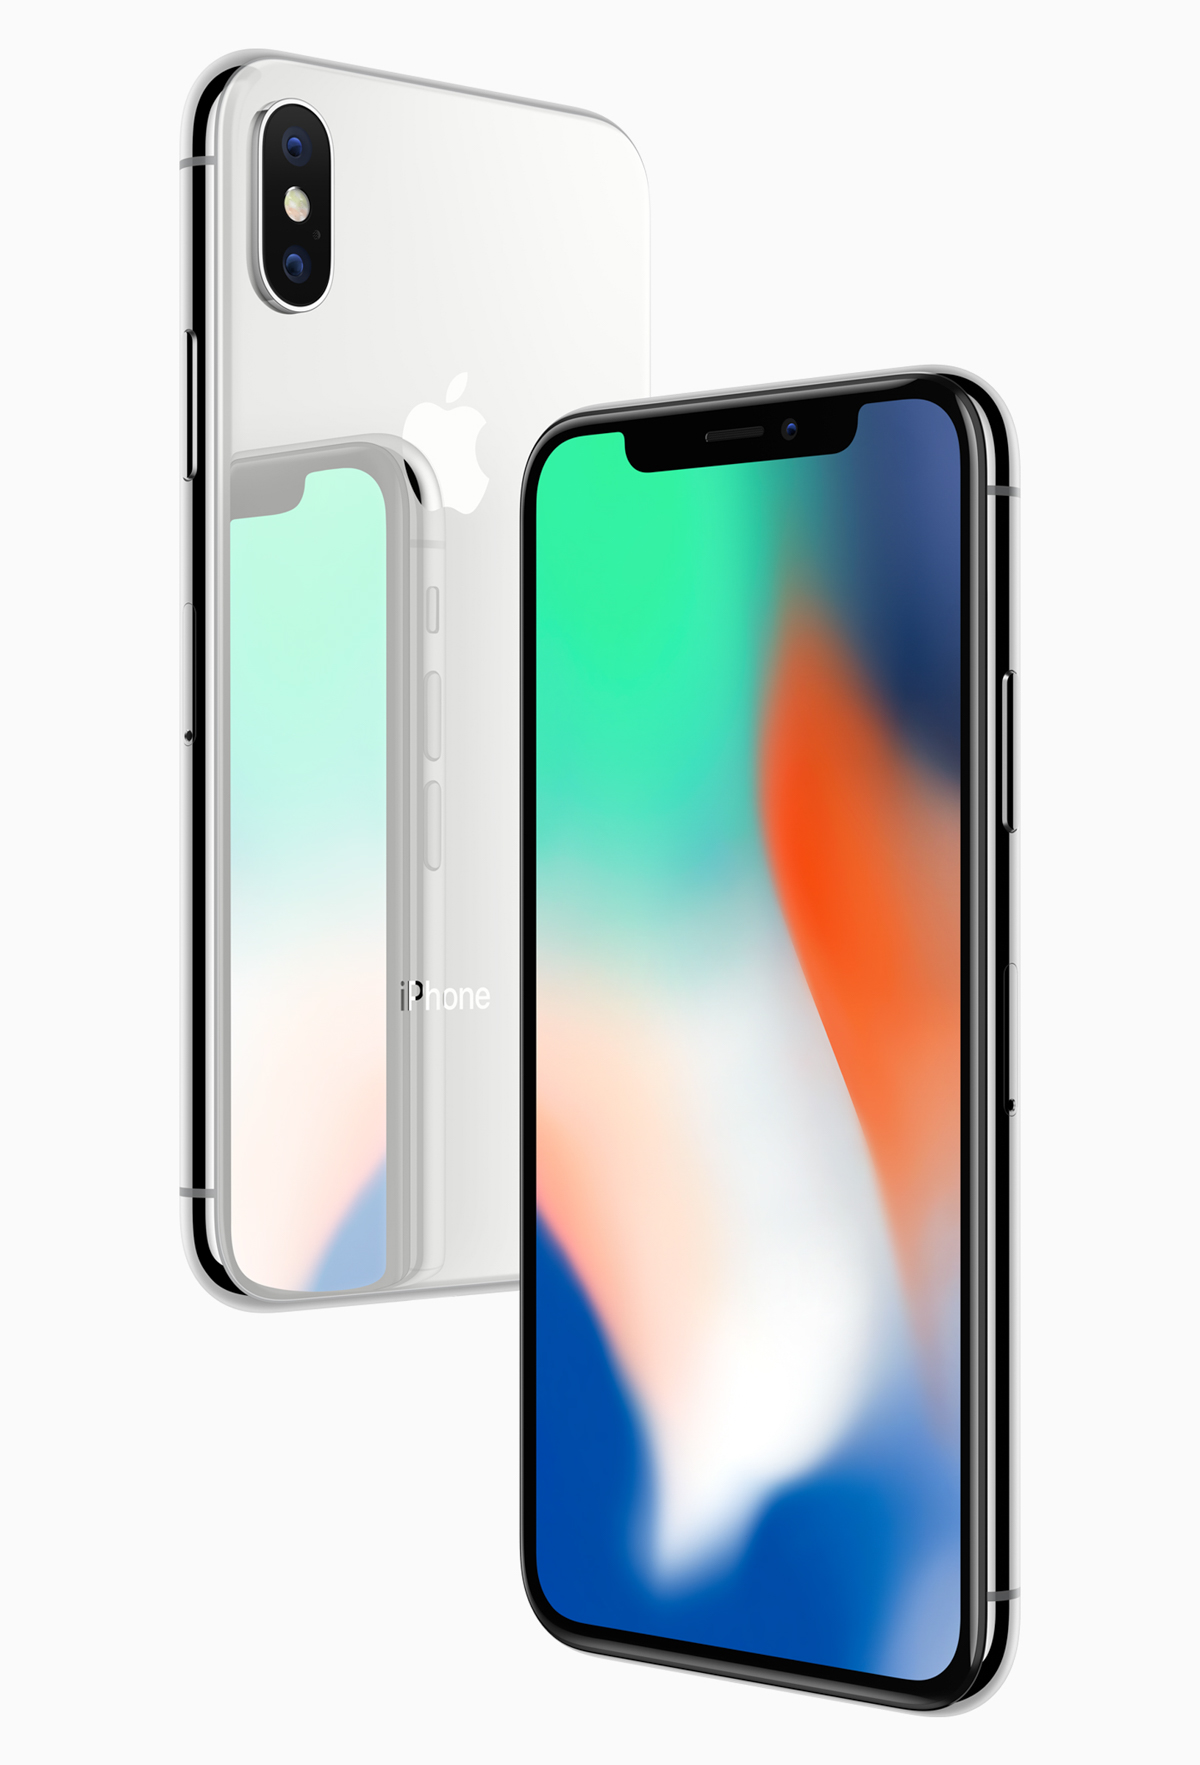 Should I Get The Apple iPhone X? 10